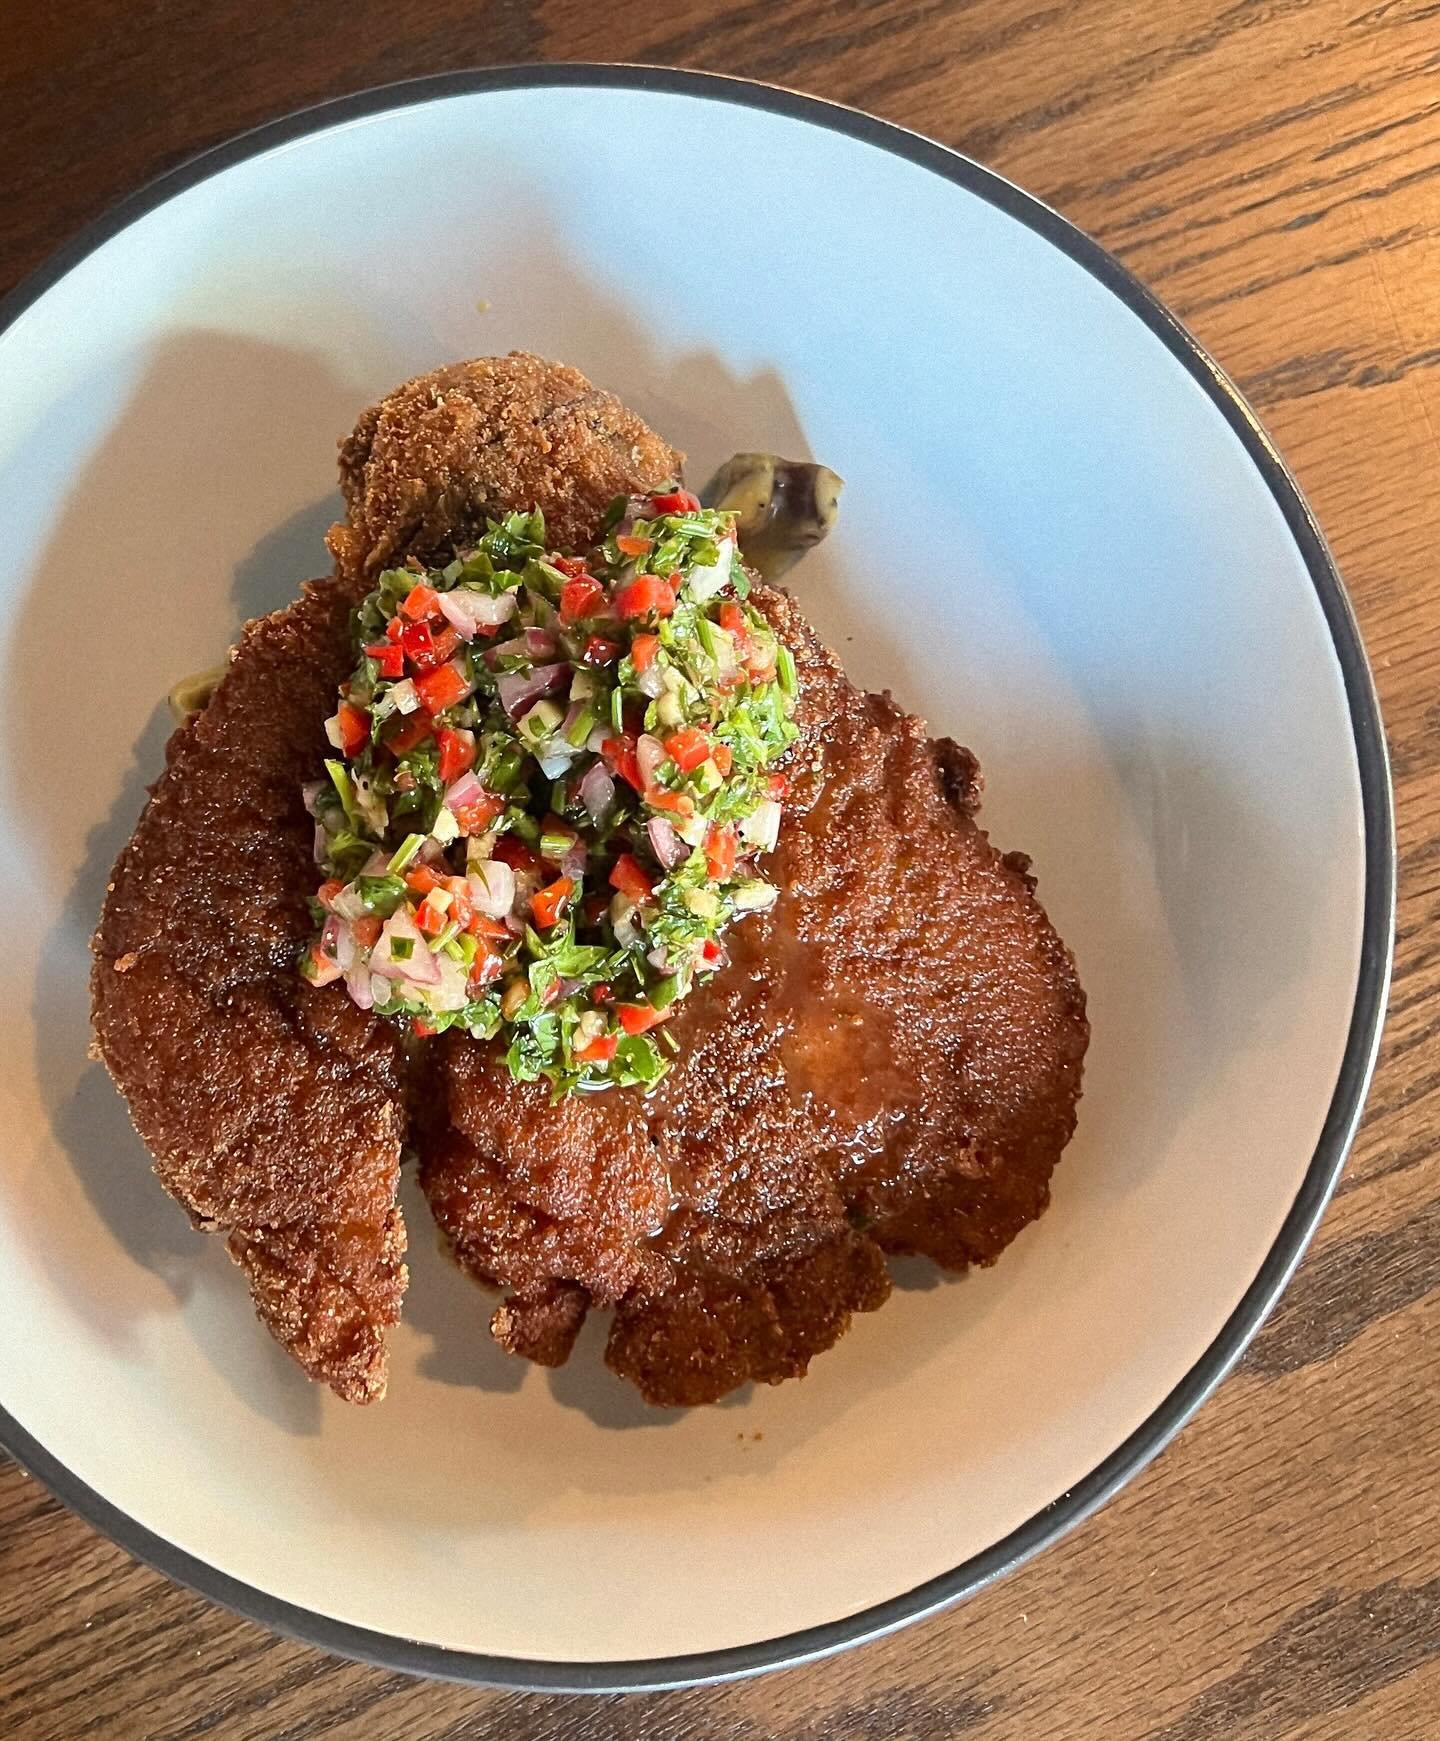 Now available during dinner, WHOLE FRIED EGGPLANT with roasted sunchokes, parmesan cream, salsa chimi 🌱 (gf)

Head over to our website to make your reservation now 🥑